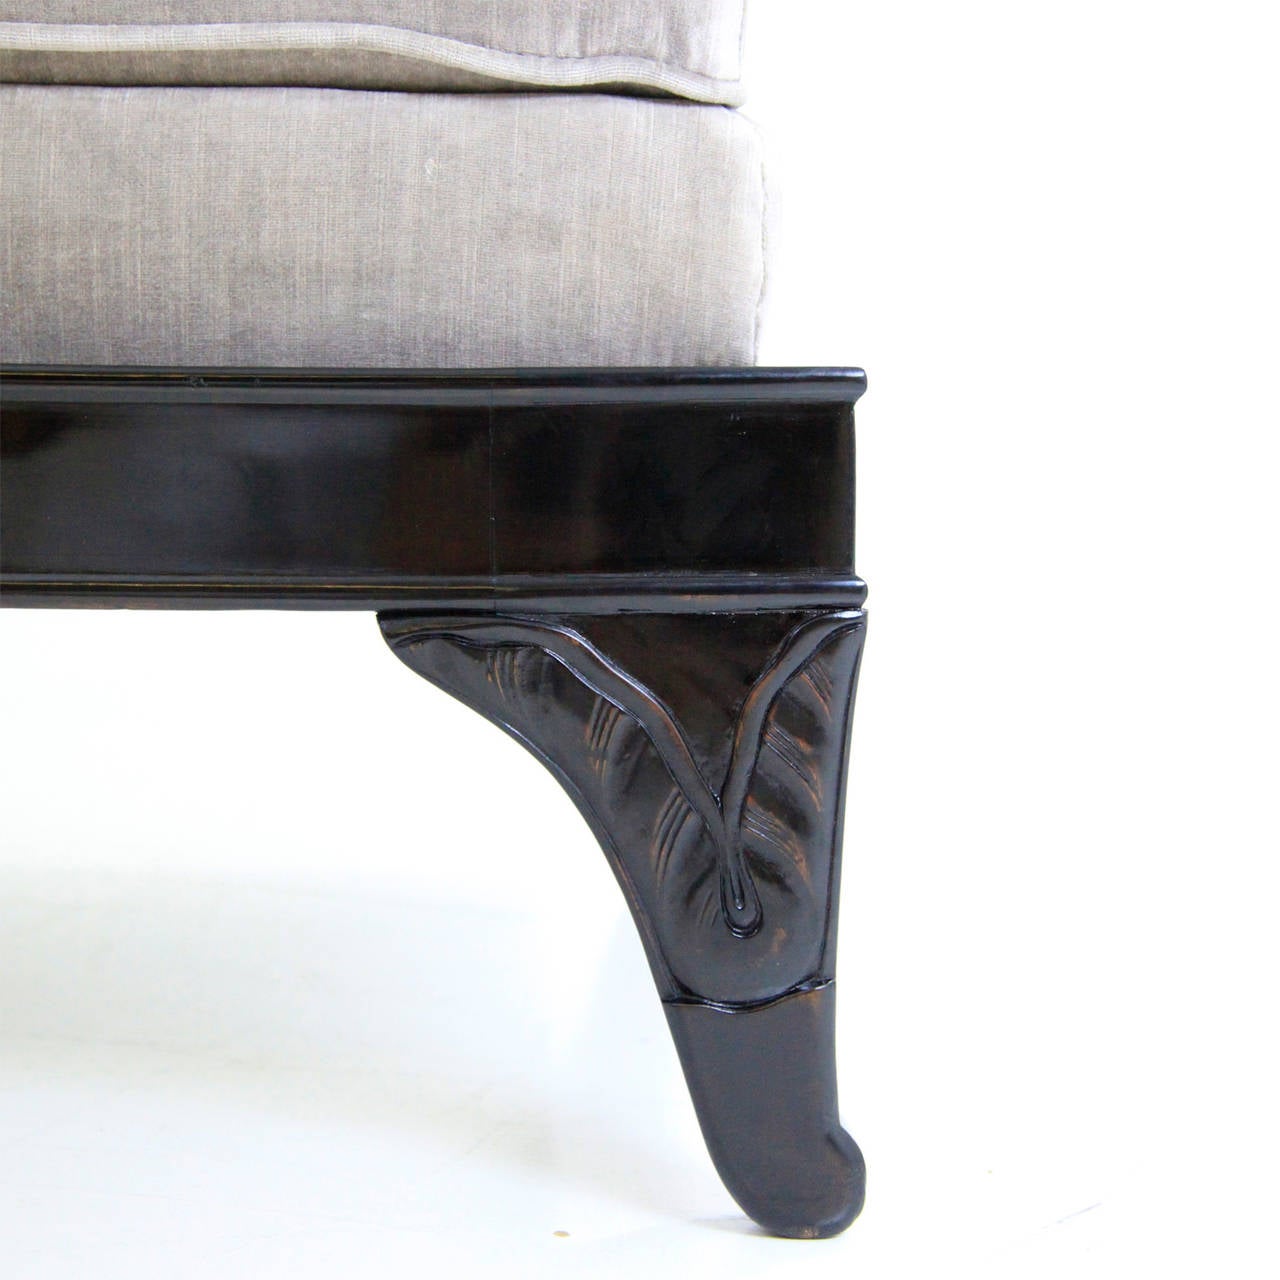 Very beautiful French ebonized recamier or couch, circa 1830s.
Elegant recamier with a simple ebonized frame and slightly curved feet.
The backrest is also curved and shows flower-shaped carvings on the sides and on the top. Further carved